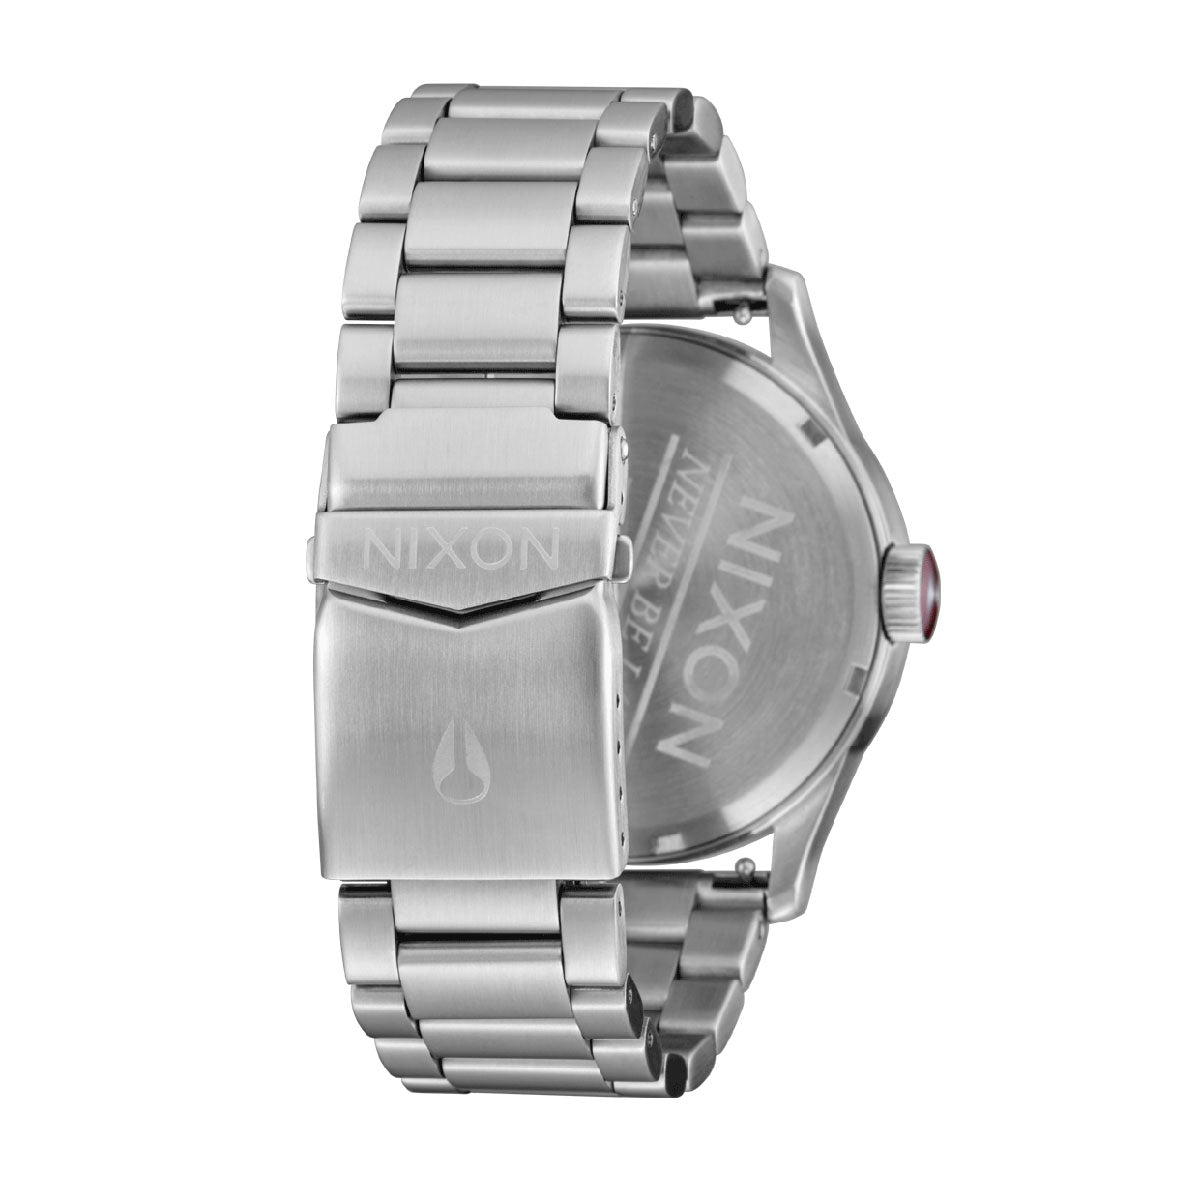 Nixon Sentry Stainless Steel Watch - Silver/Cranberry image 4